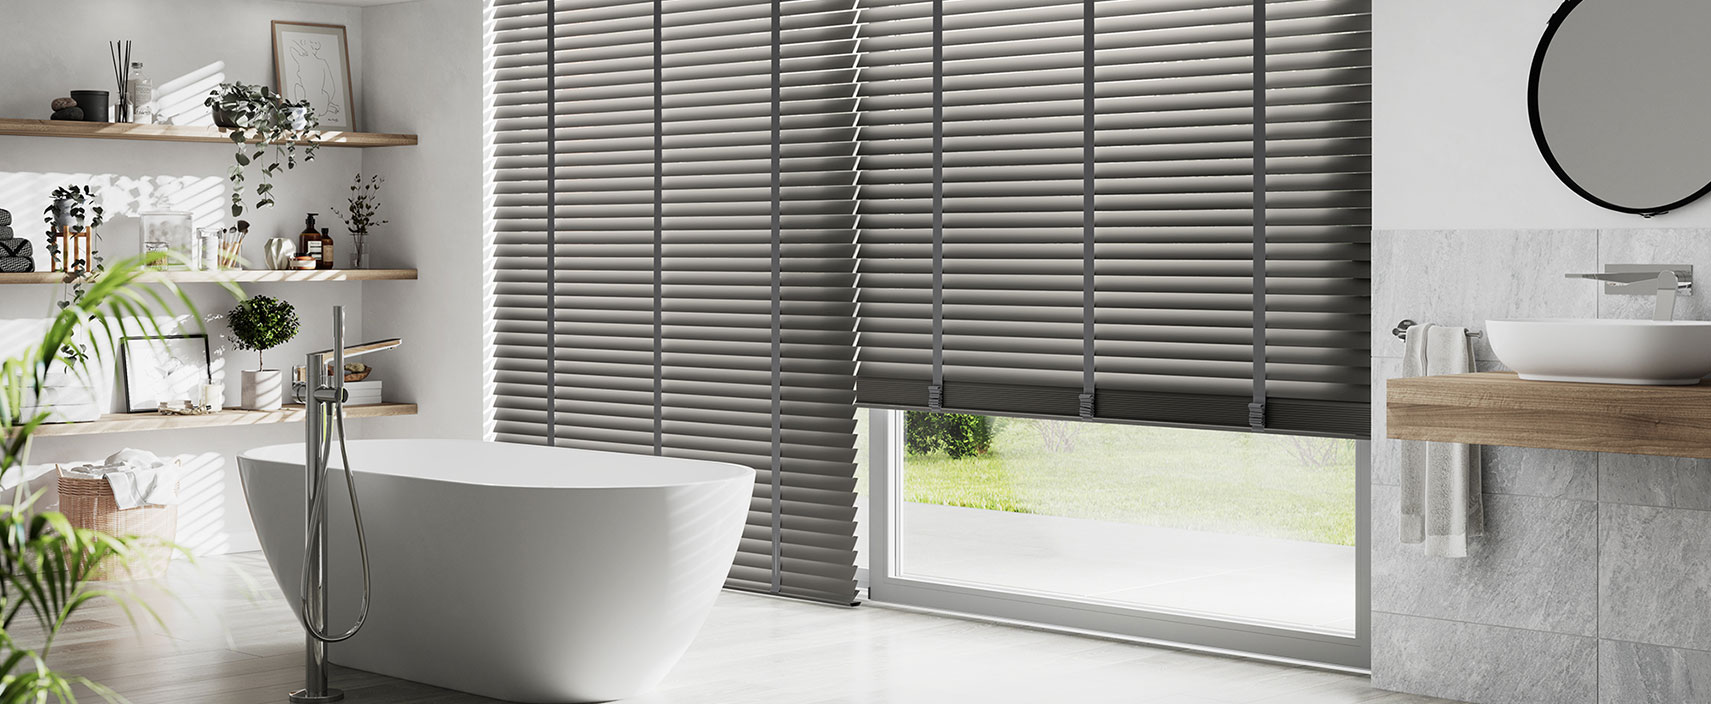 Five Recommendations on the Best Bathroom Blinds